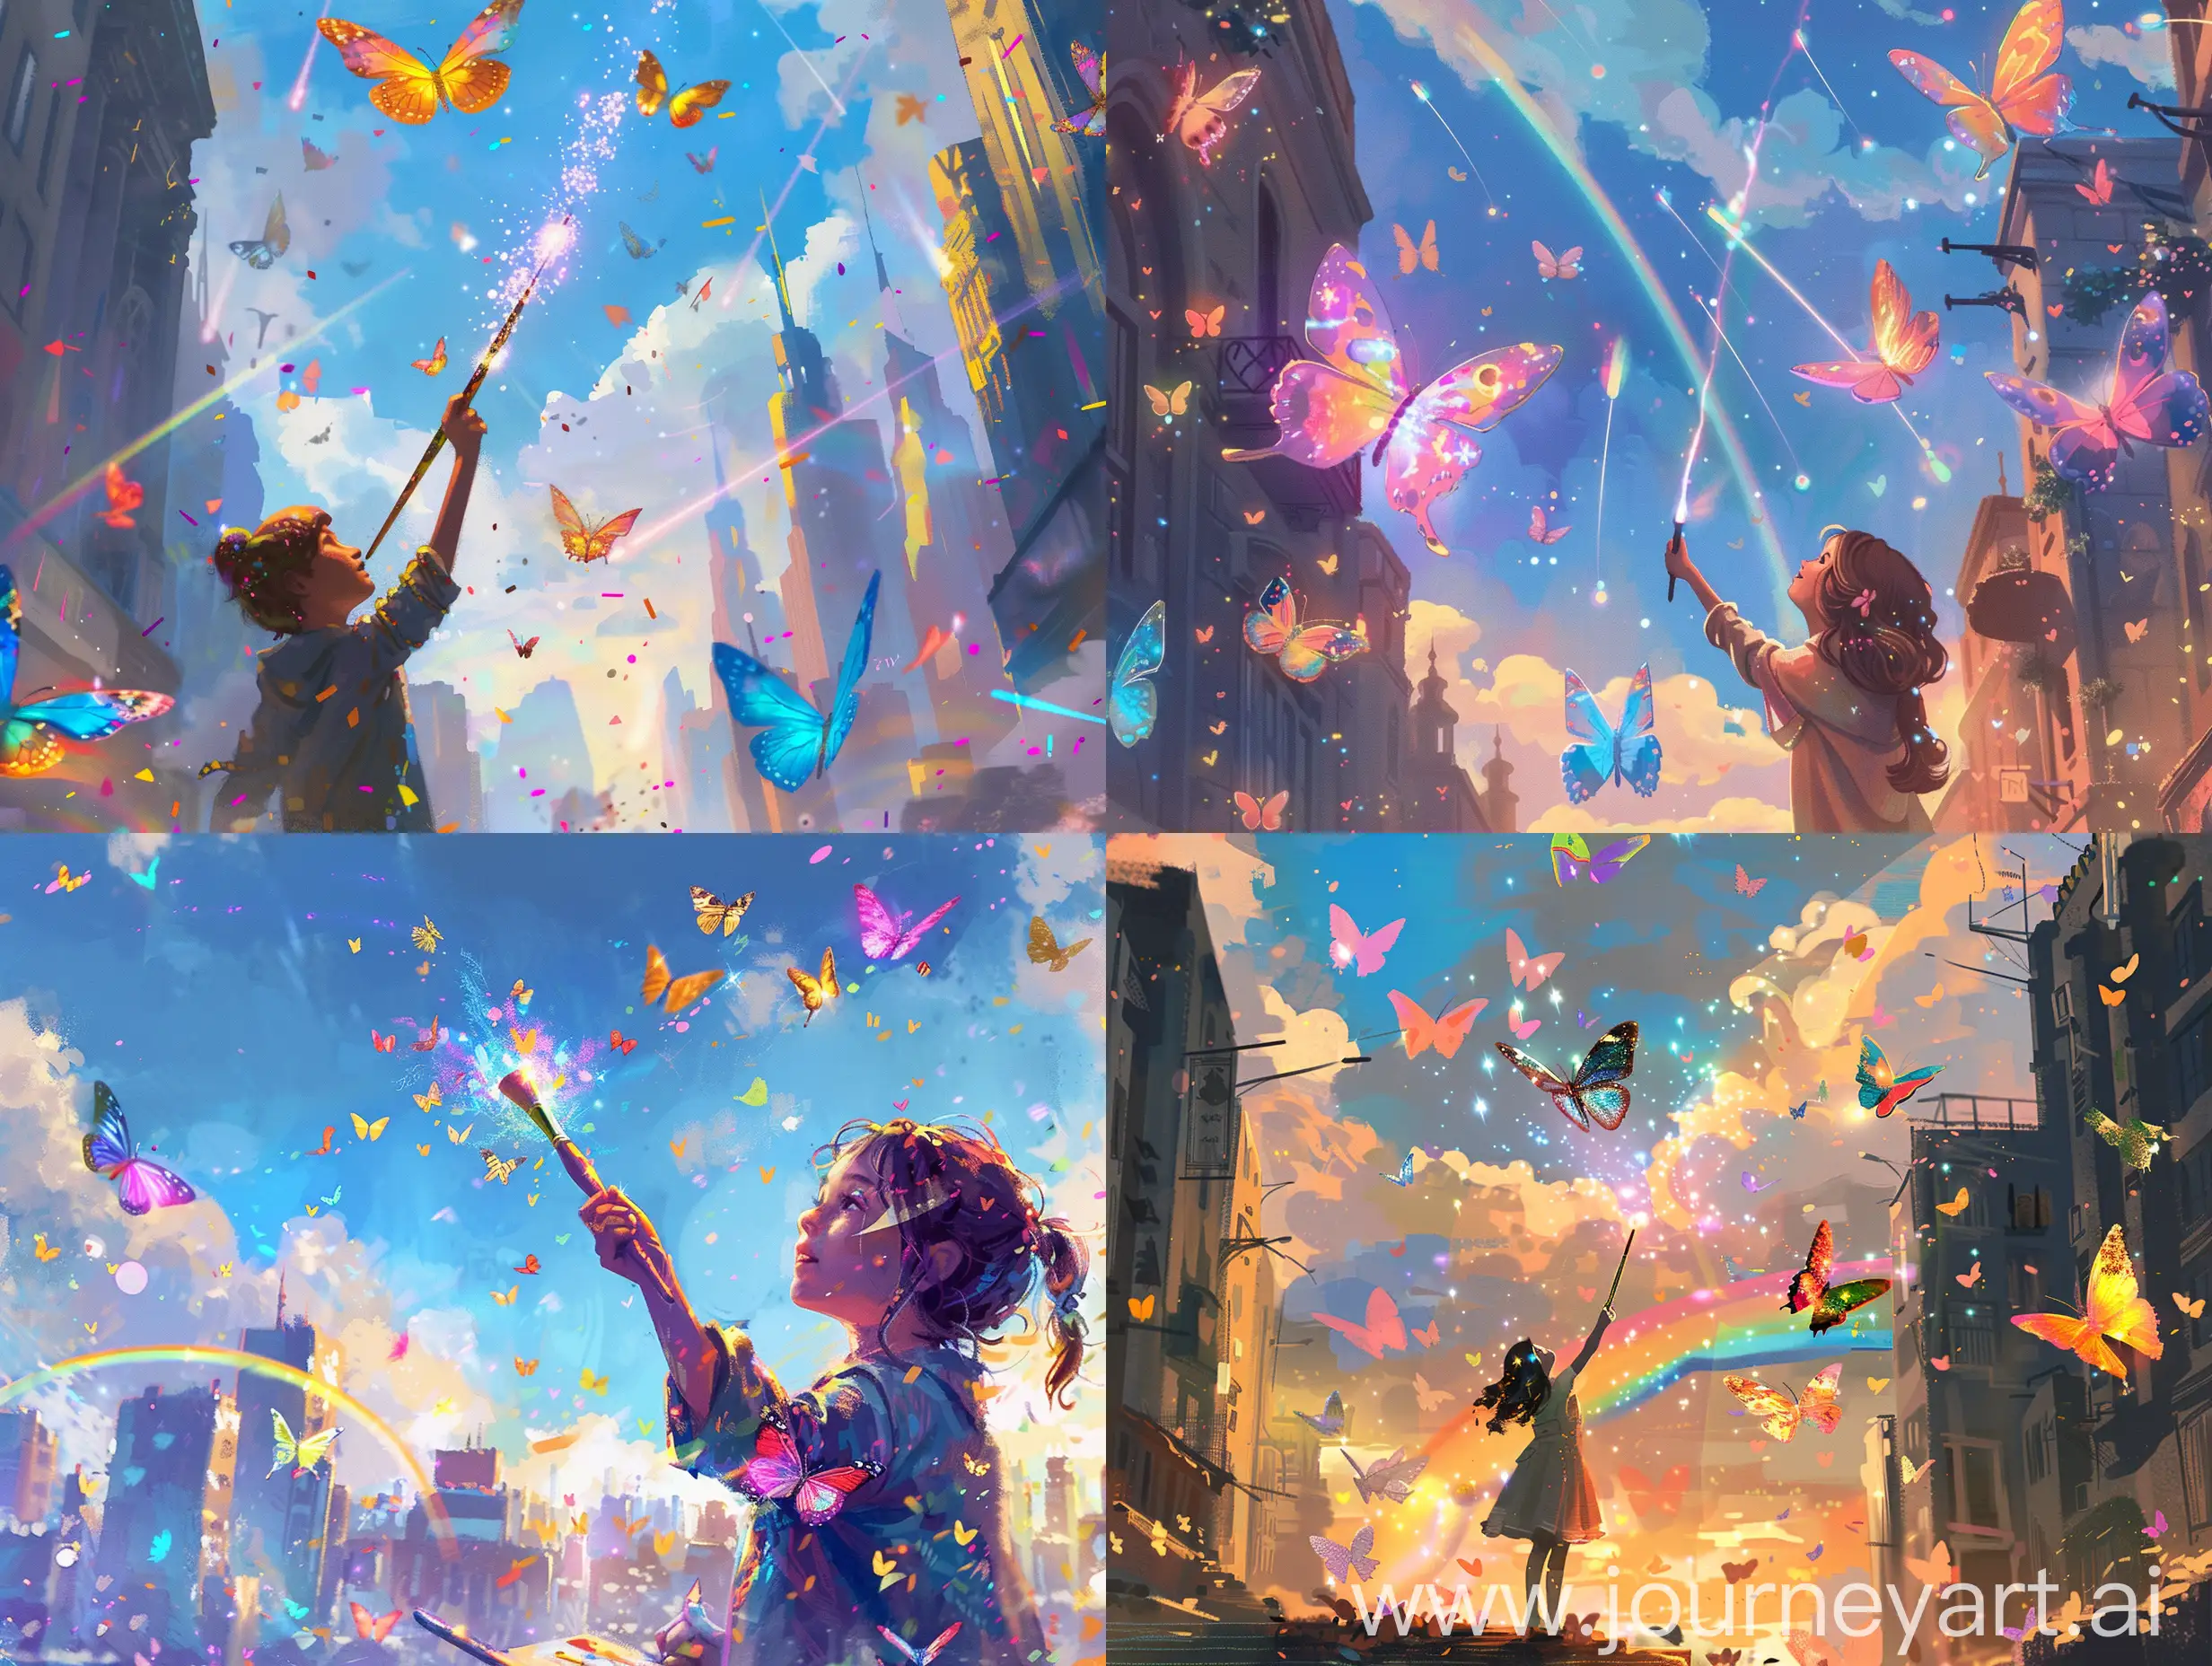 
In a bustling city, Ellie, a young artist, discovered a mysterious paintbrush with a shimmering glow. Intrigued, she dipped it into her palette, and every stroke brought her paintings to life. Colorful butterflies fluttered from her canvases, and rainbows danced across the sky.